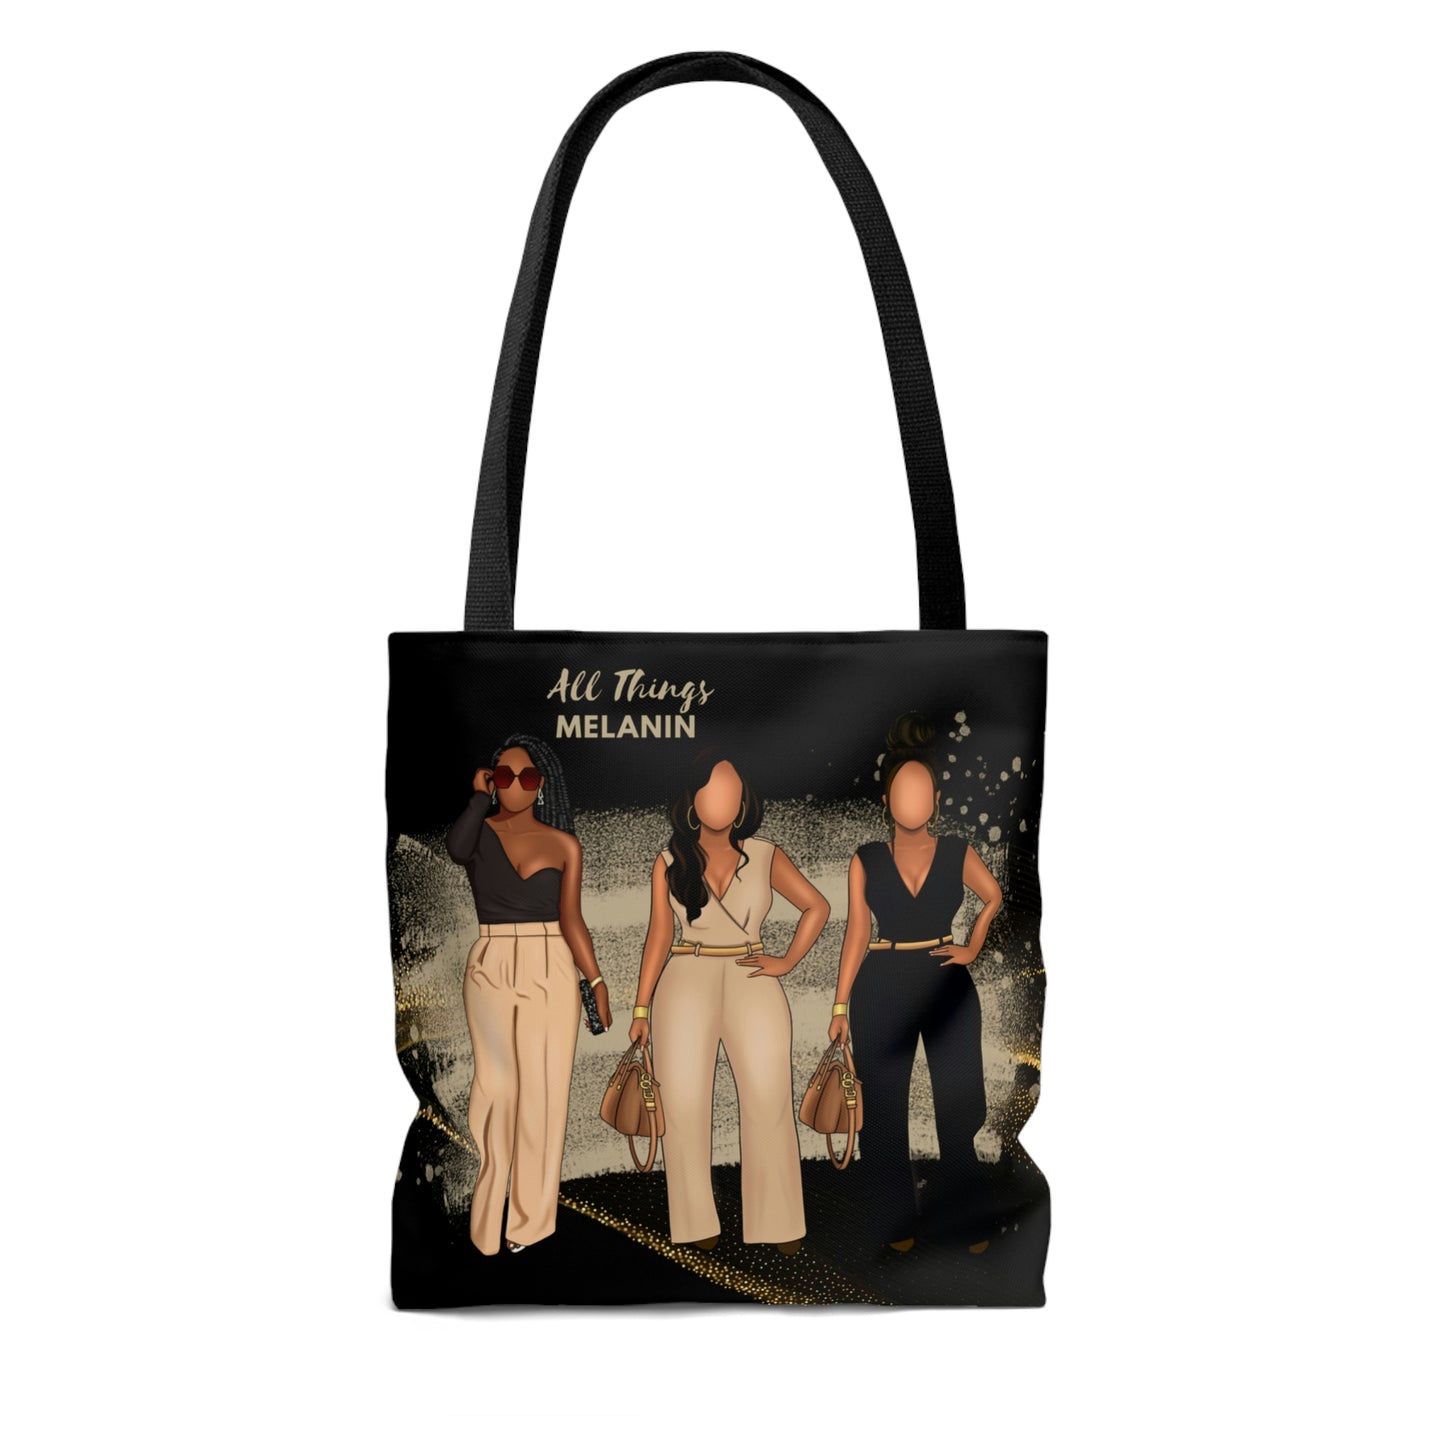 All Things Melanin (ATM Collection) Tote Bag